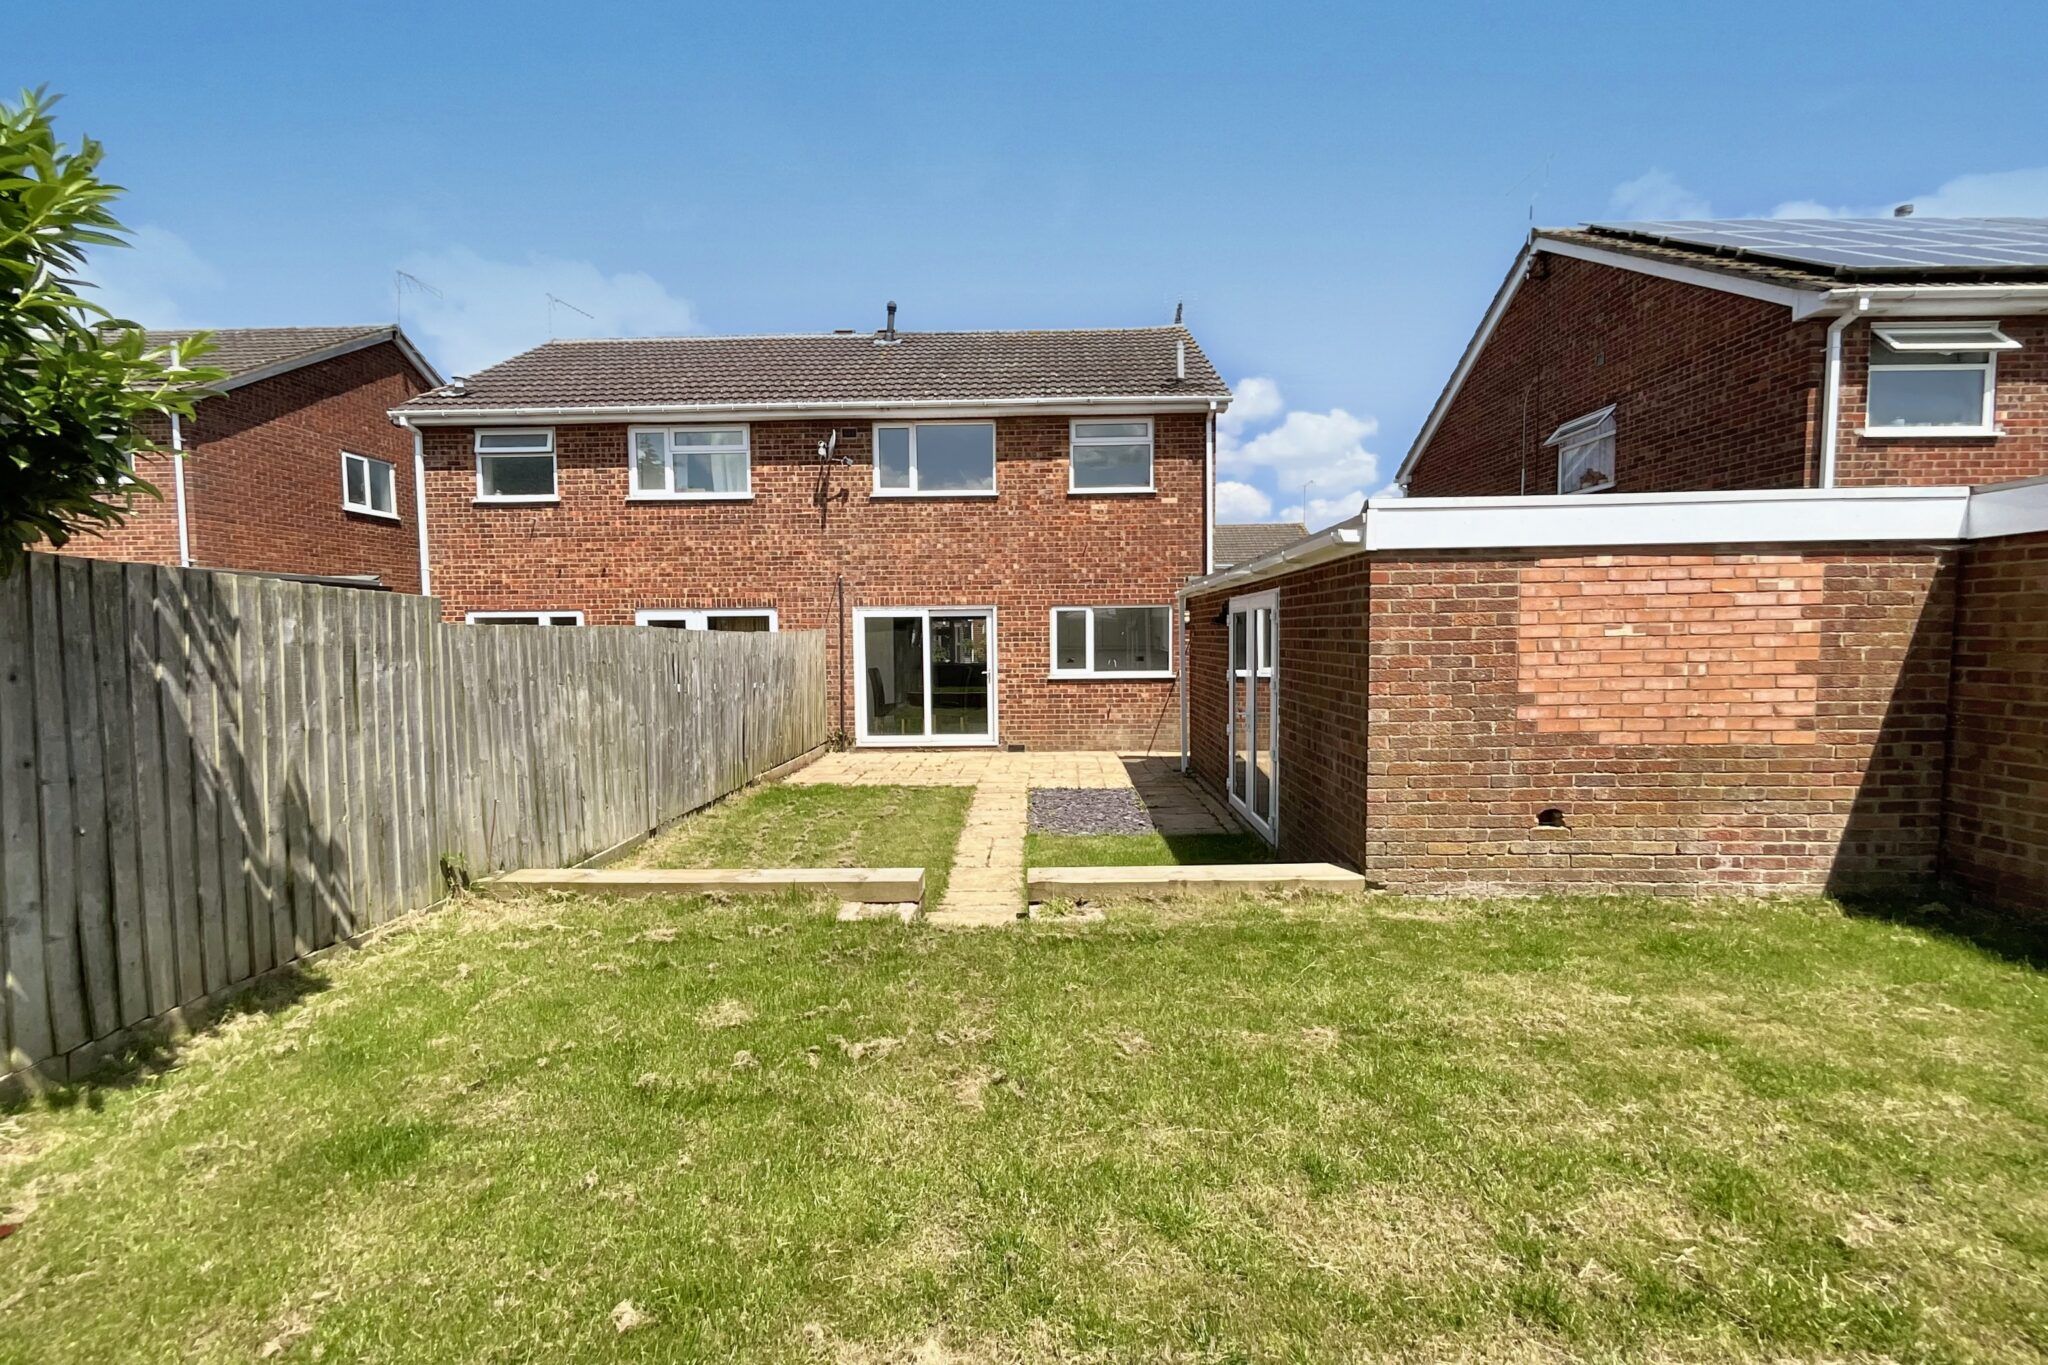 Cookes Drive, Broughton Astley, Leicester, Leicester, LE9 6RH